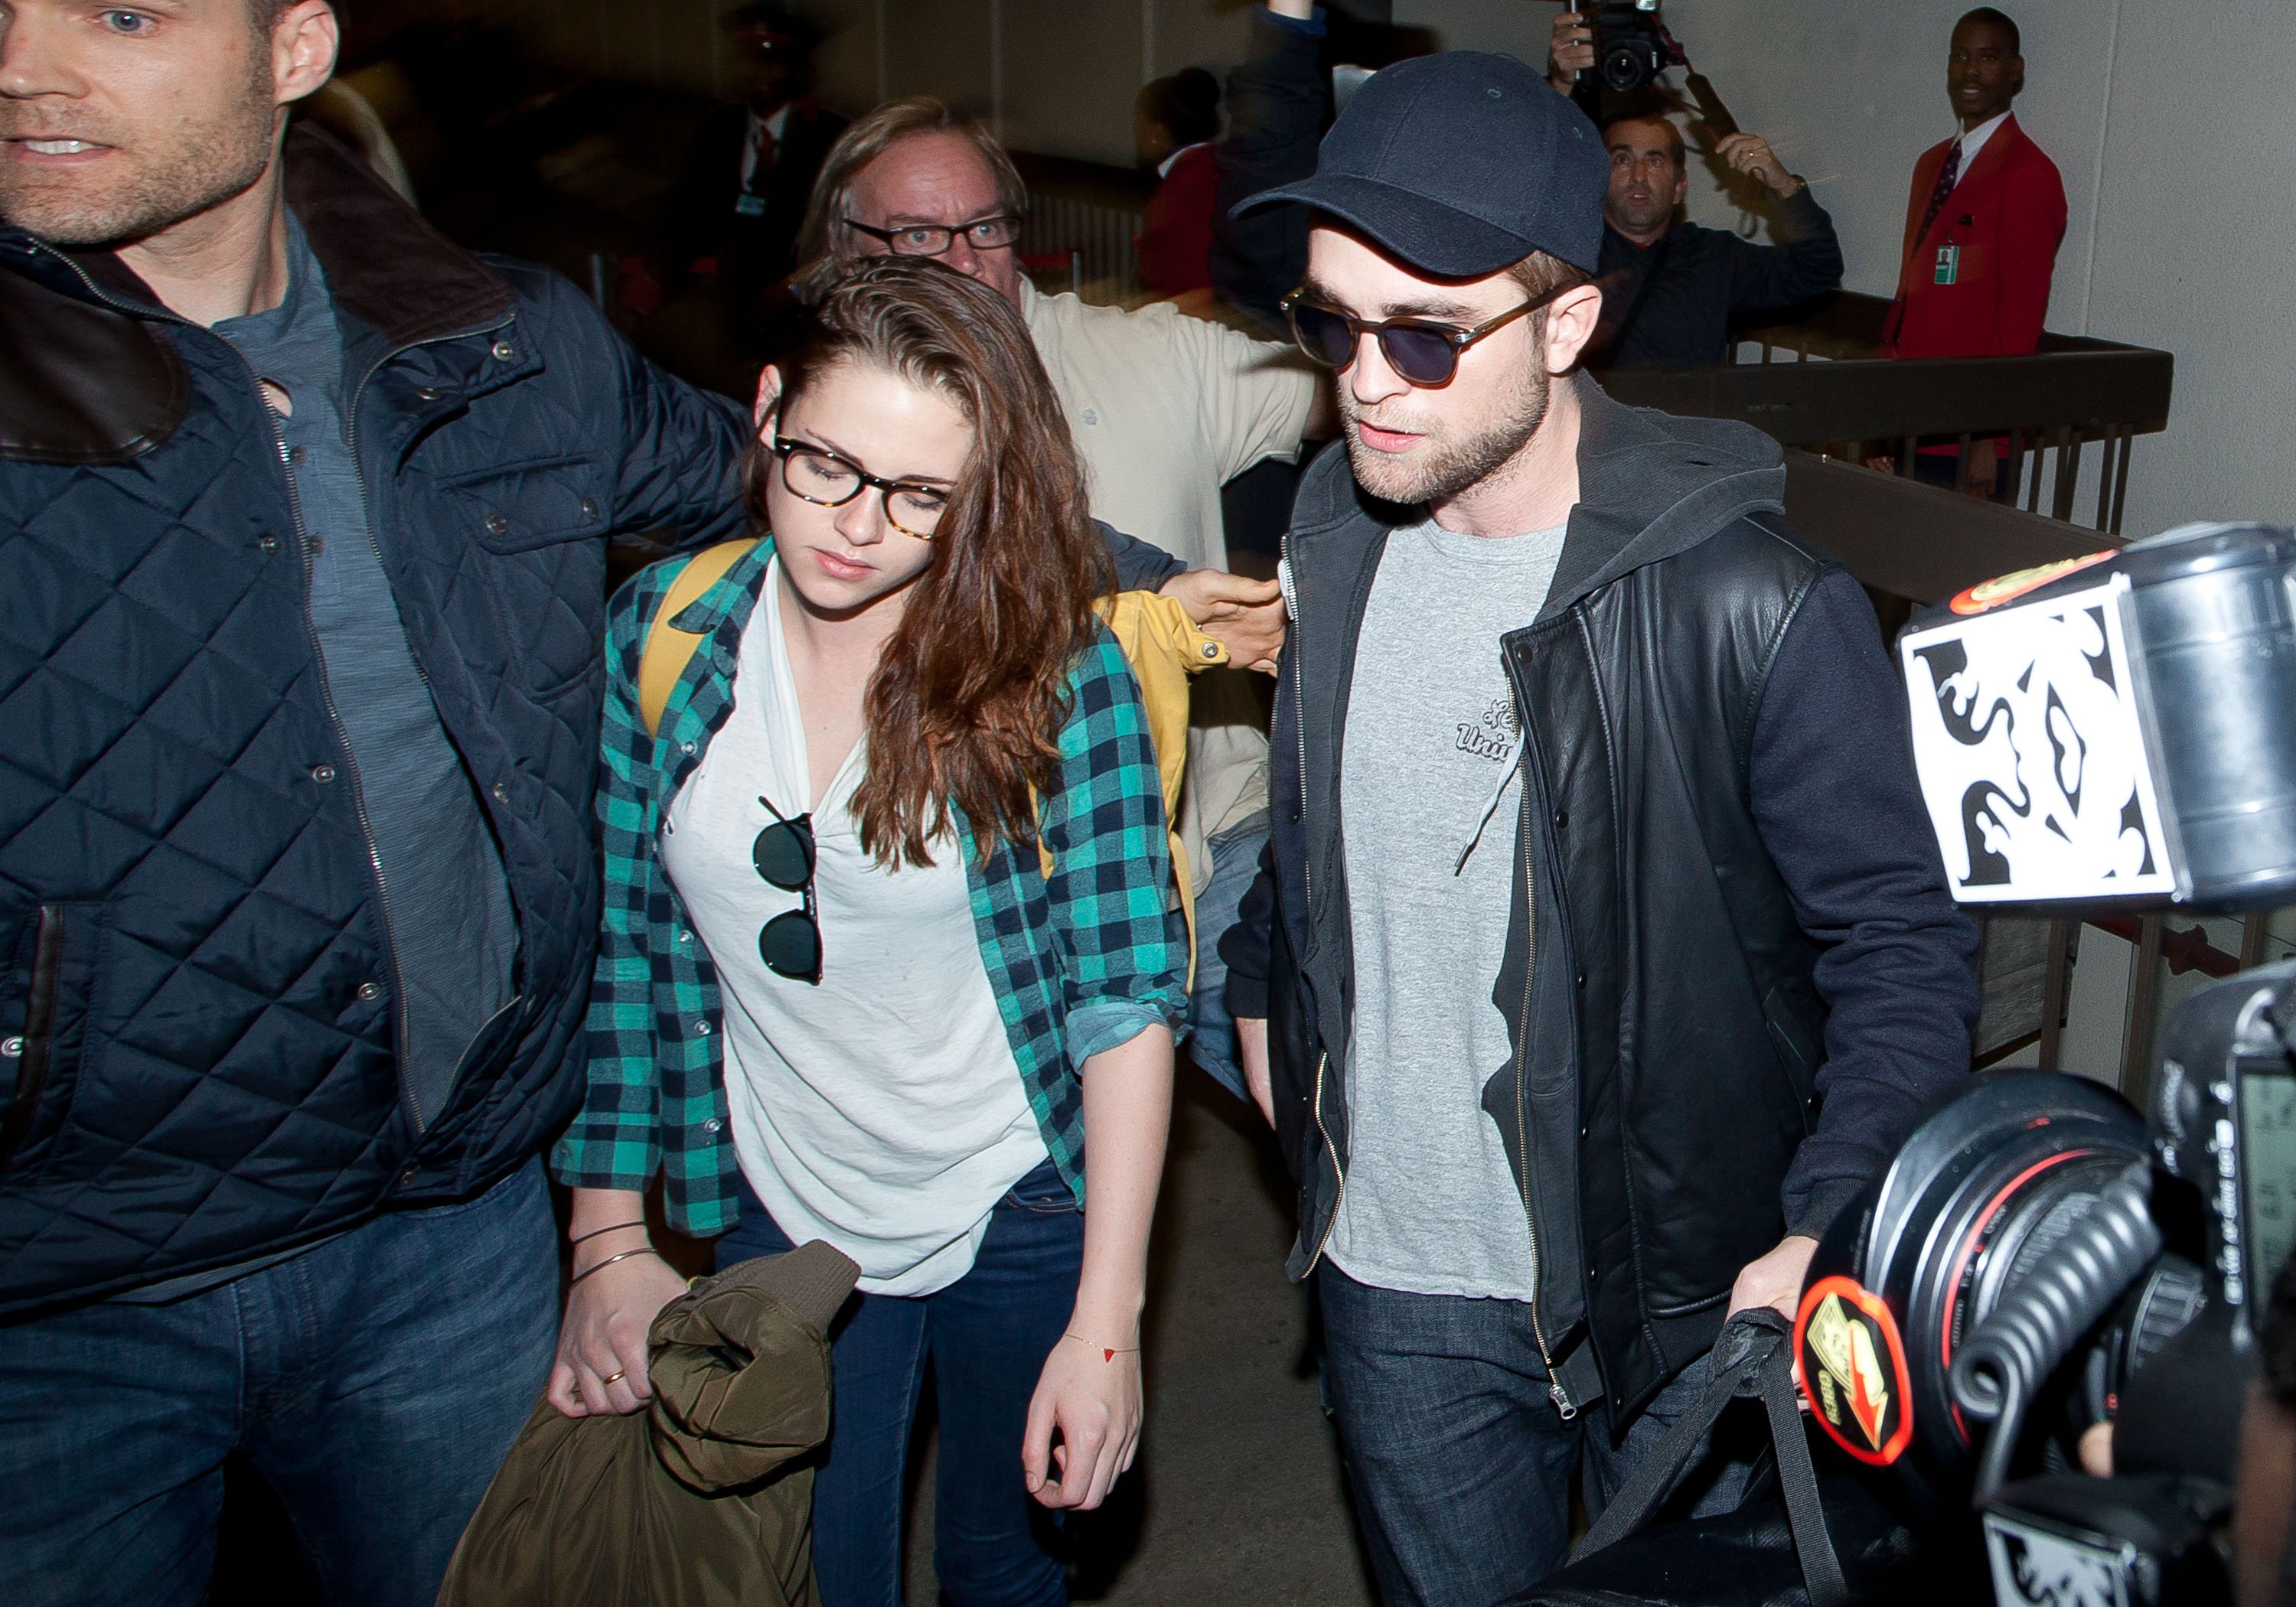 Kristen Stewart and Robert Pattinson are seen at LAX (Los Angeles International Airport) on November 26, 2012 in Los Angeles, California. | Source: Getty Images